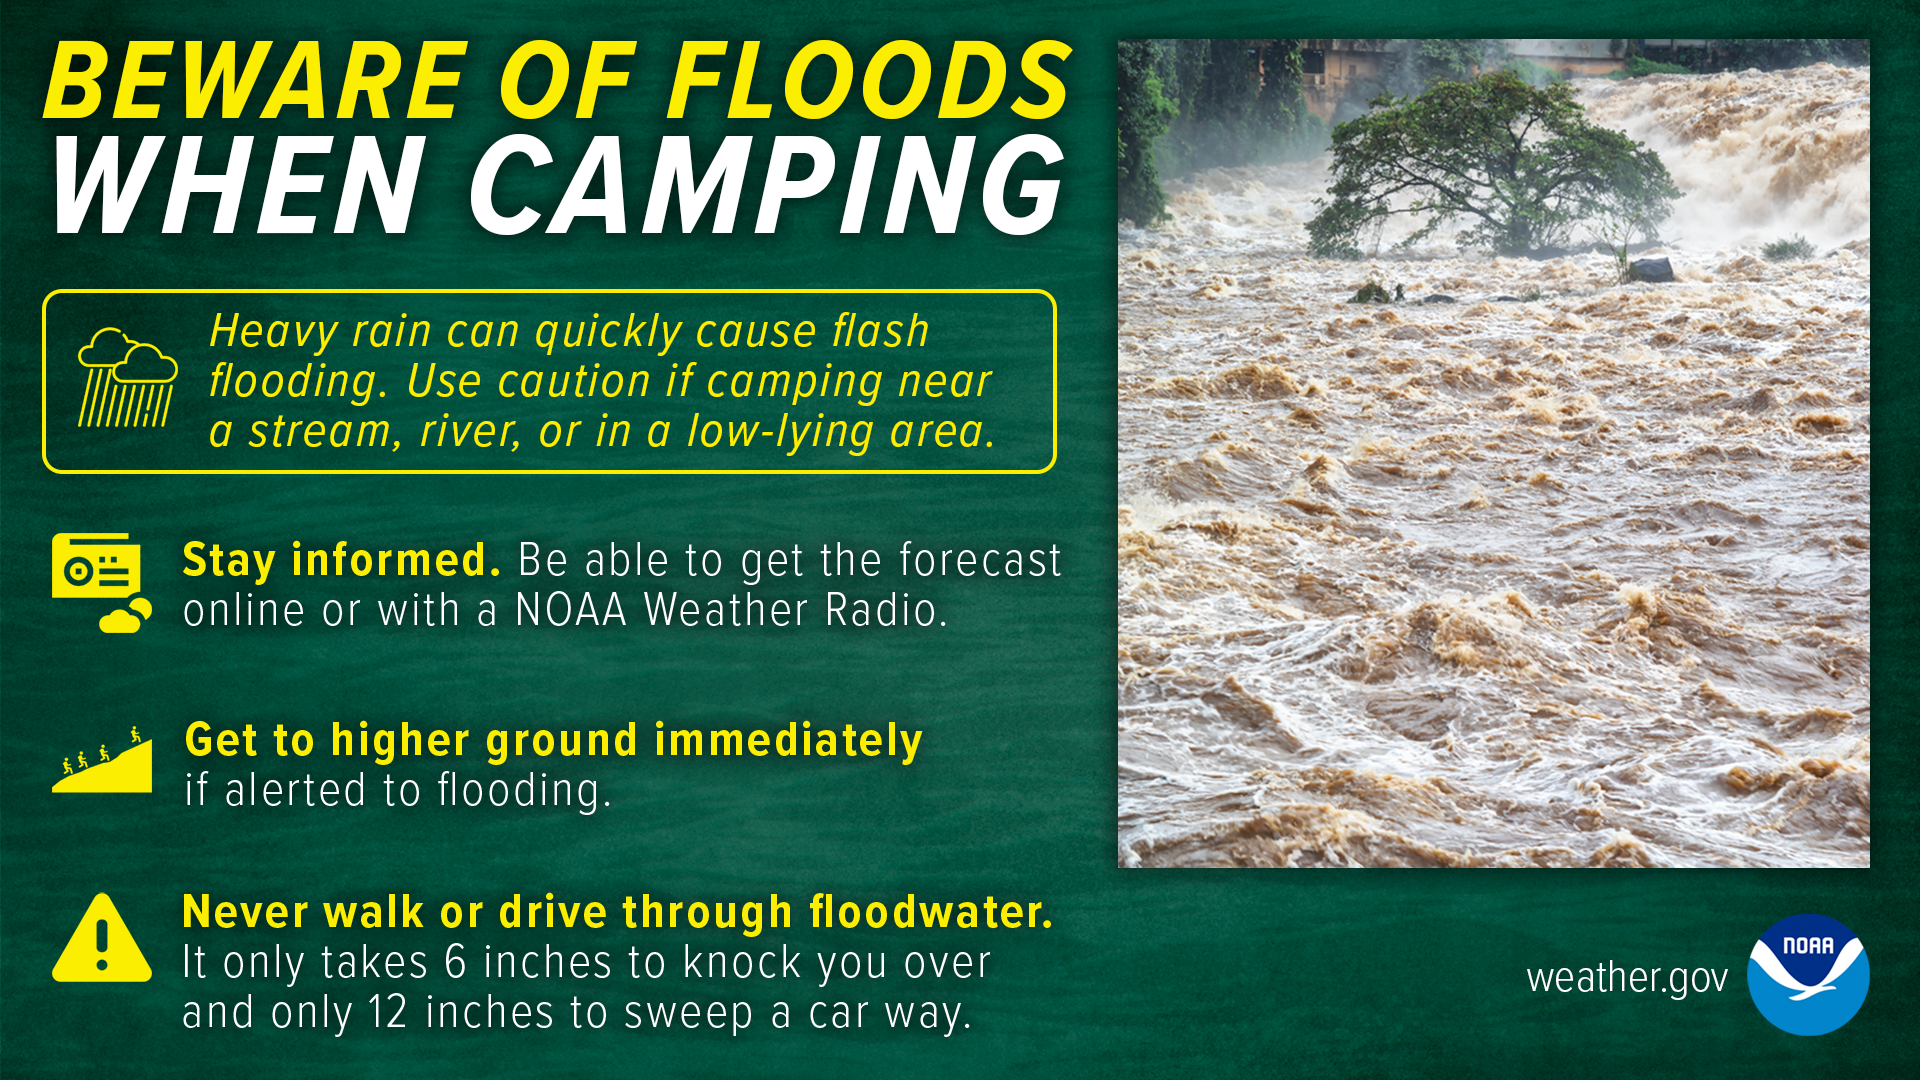 Beware of floods when camping. Heavy rains can quickly cause flash flooding. Use caution if camping near a stream, river, or in a low-lying area. Stay informed. Be able to get the forecast online or with a NOAA Weather Radio. Get to higher ground immediately if alerted to flooding. Never walk or drive through floodwater. It only takes 6 inches to knock you over and only 12 inches to sweep a car away.